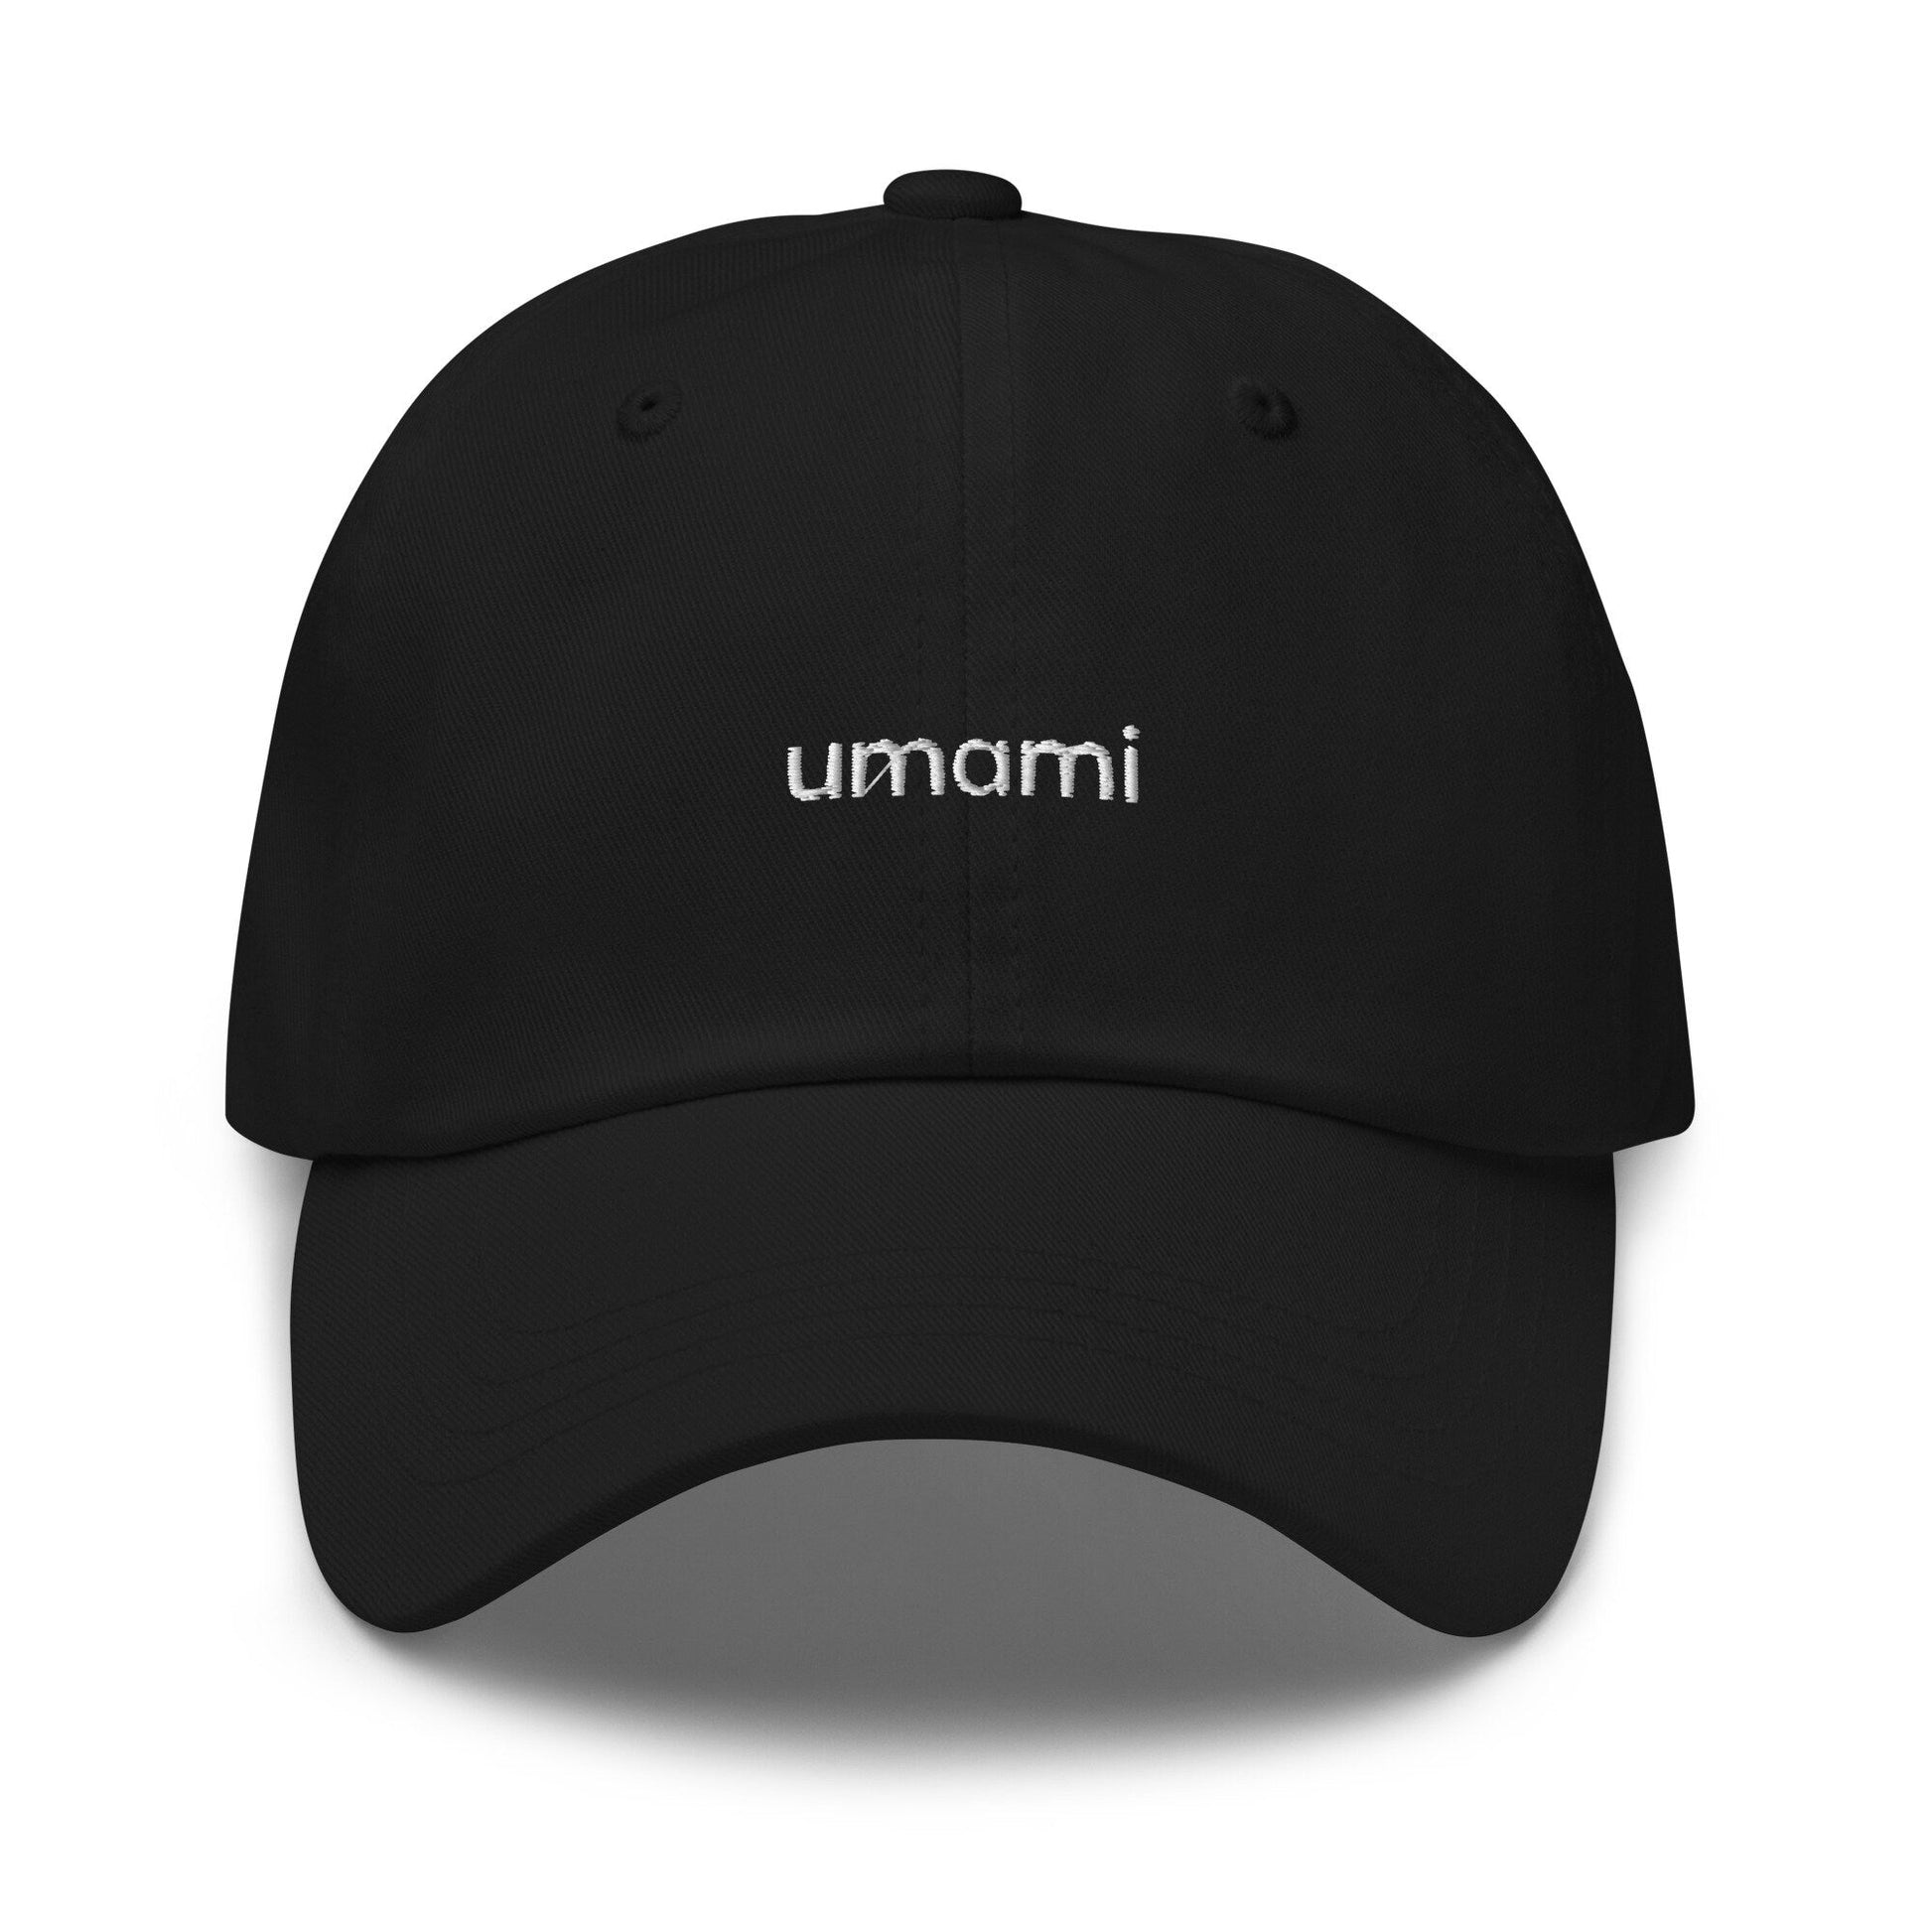 Umami Dad Hat - Gift for Foodies and Home Chefs - Cotton Embroidered Baseball Cap - Multiple Colors - Evilwater Originals